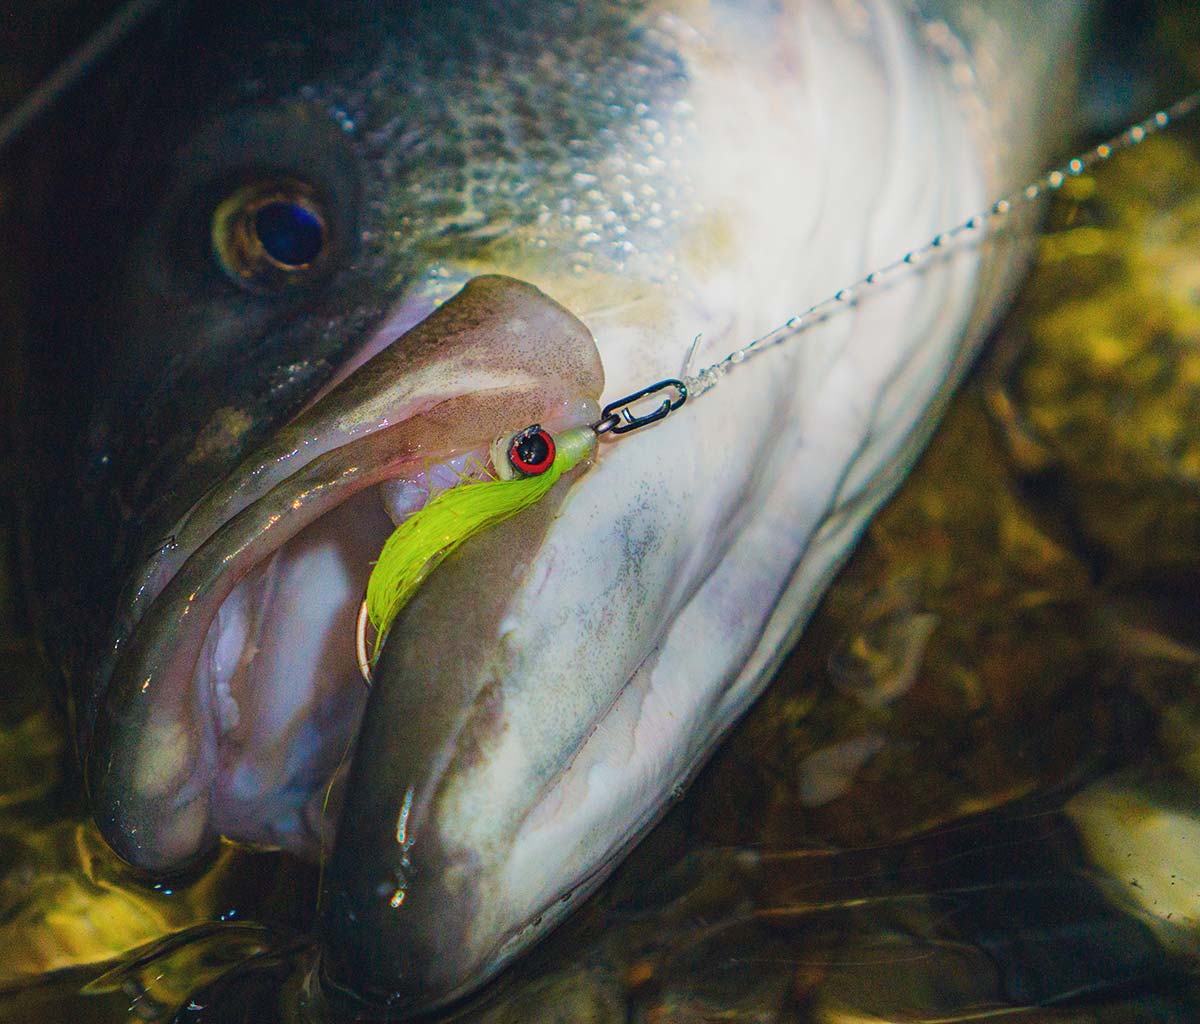 Surf: Fly Fishing “Quick Clips” - The Fisherman